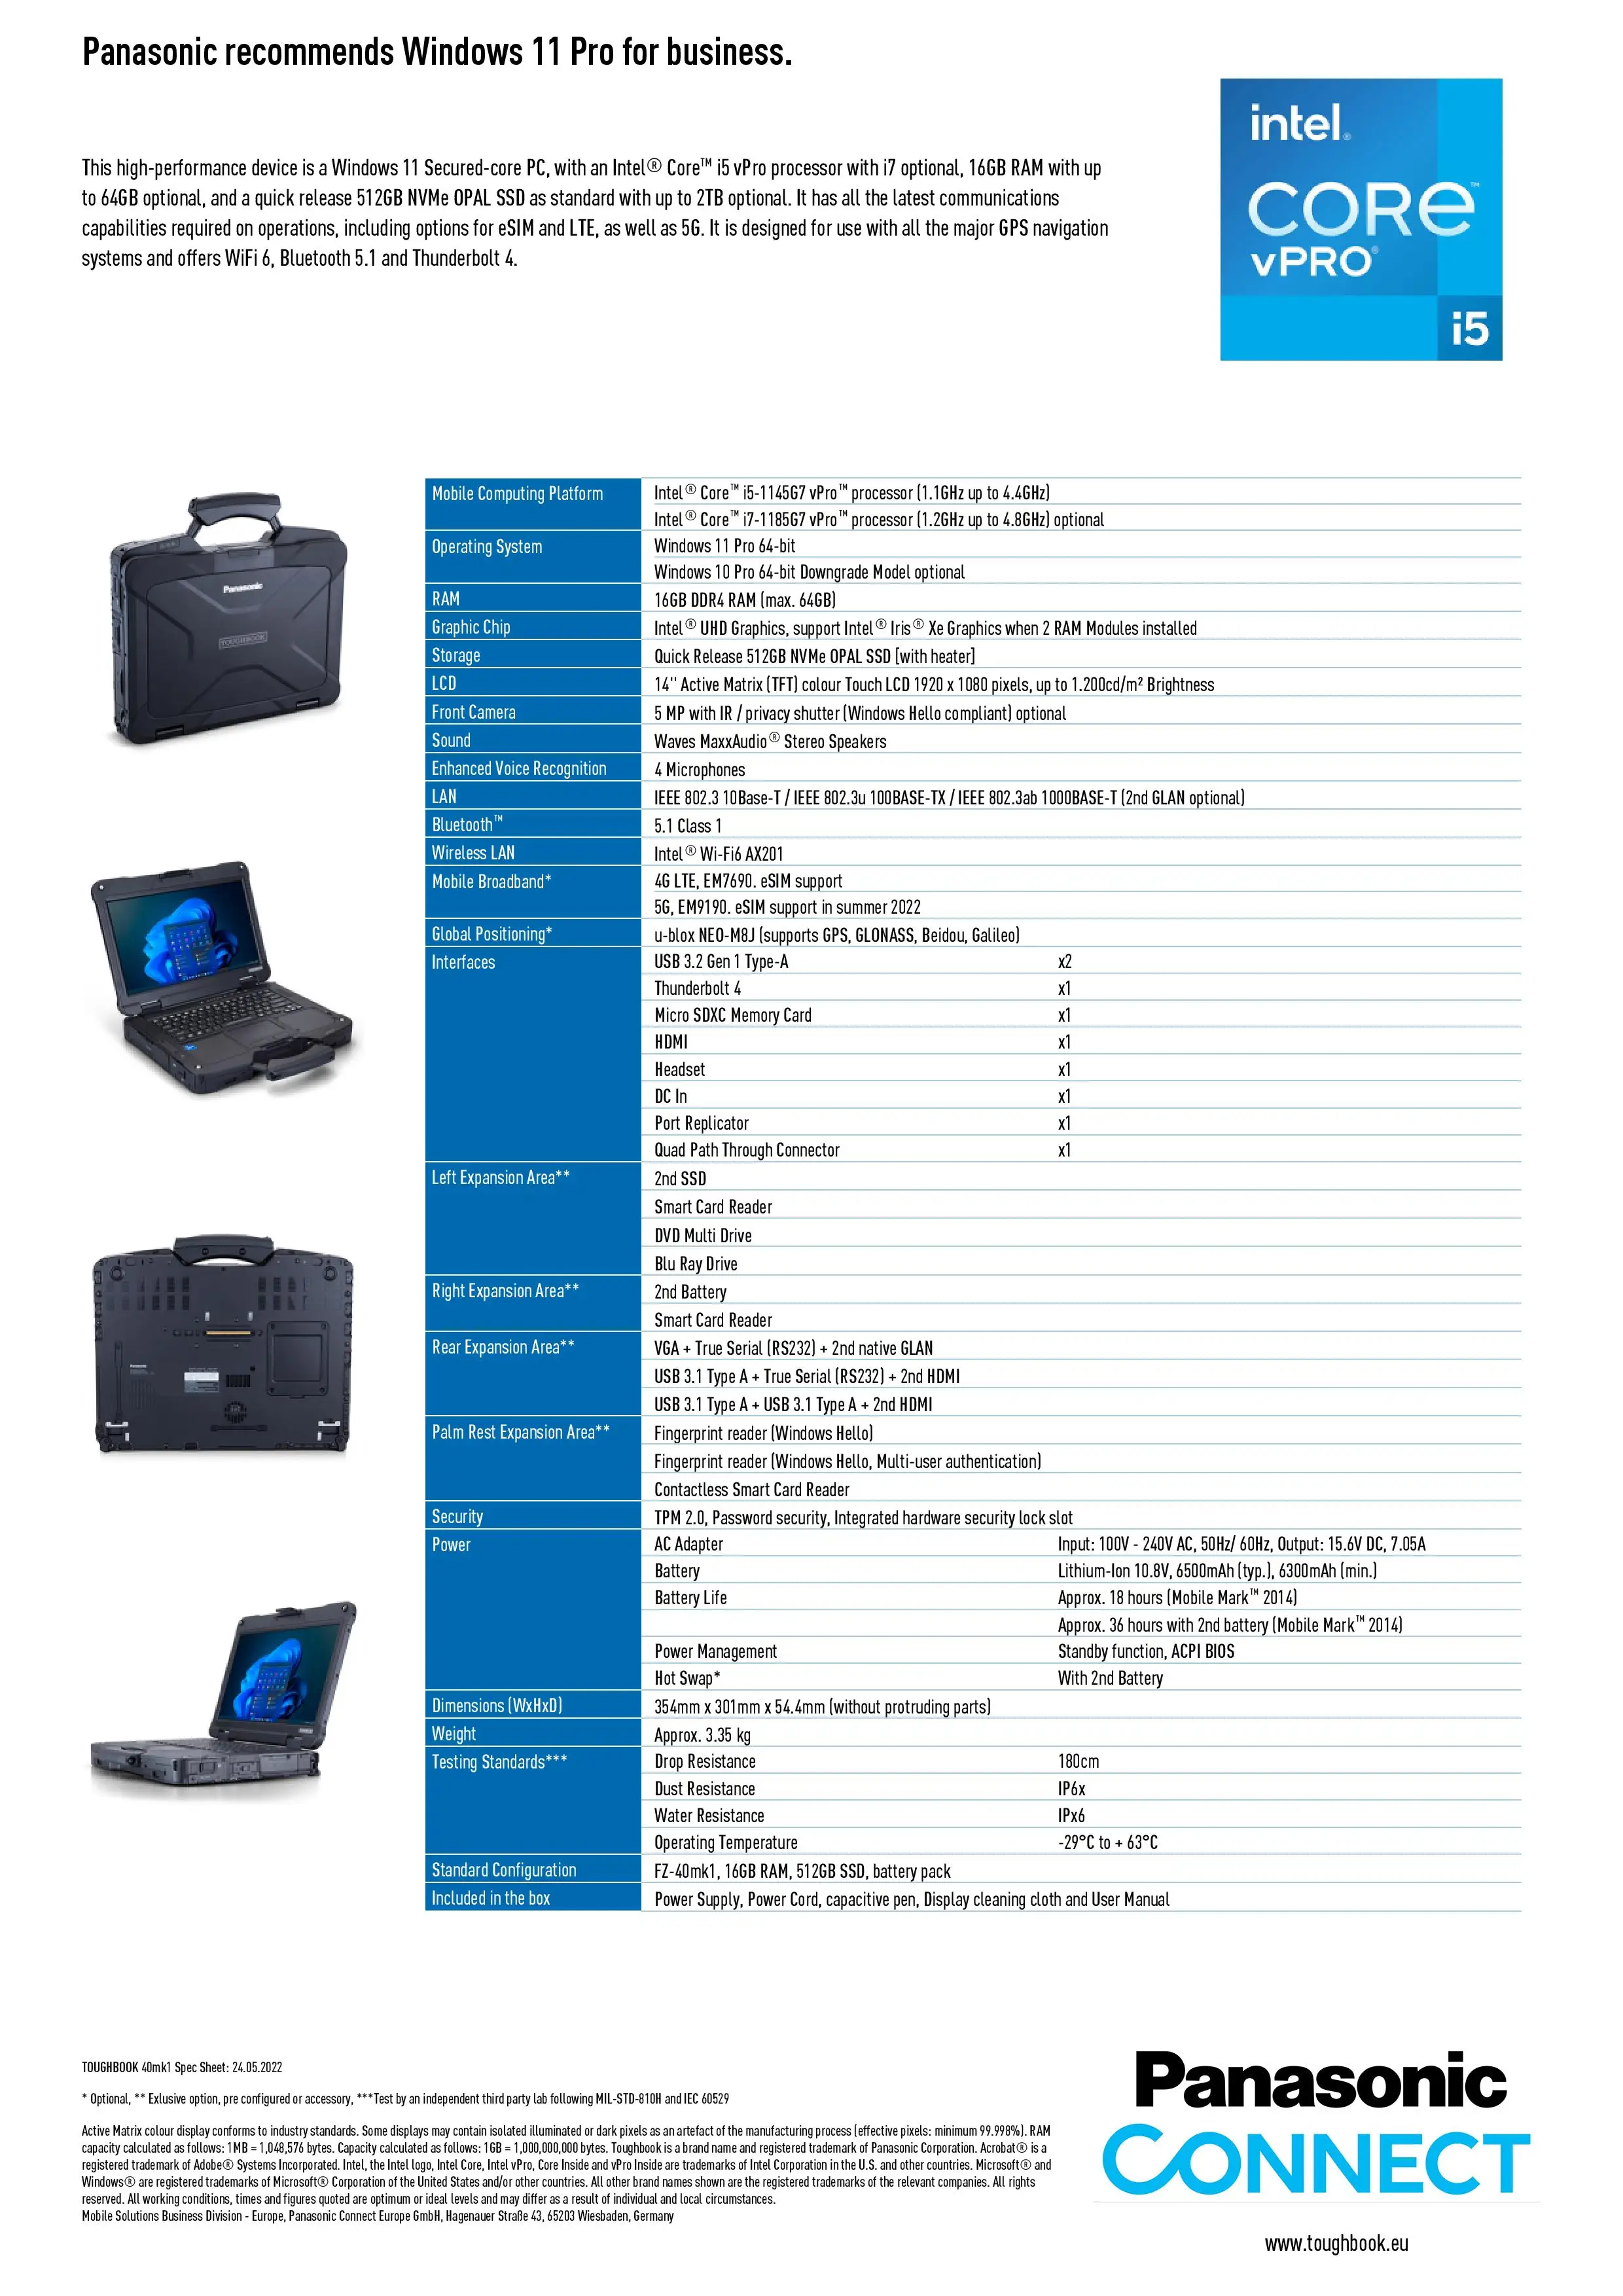 TOUGHBOOK 40 - Modular fully rugged notebook with a 14" active-matrix colour touch LCD, Robust magnesium housing IP66